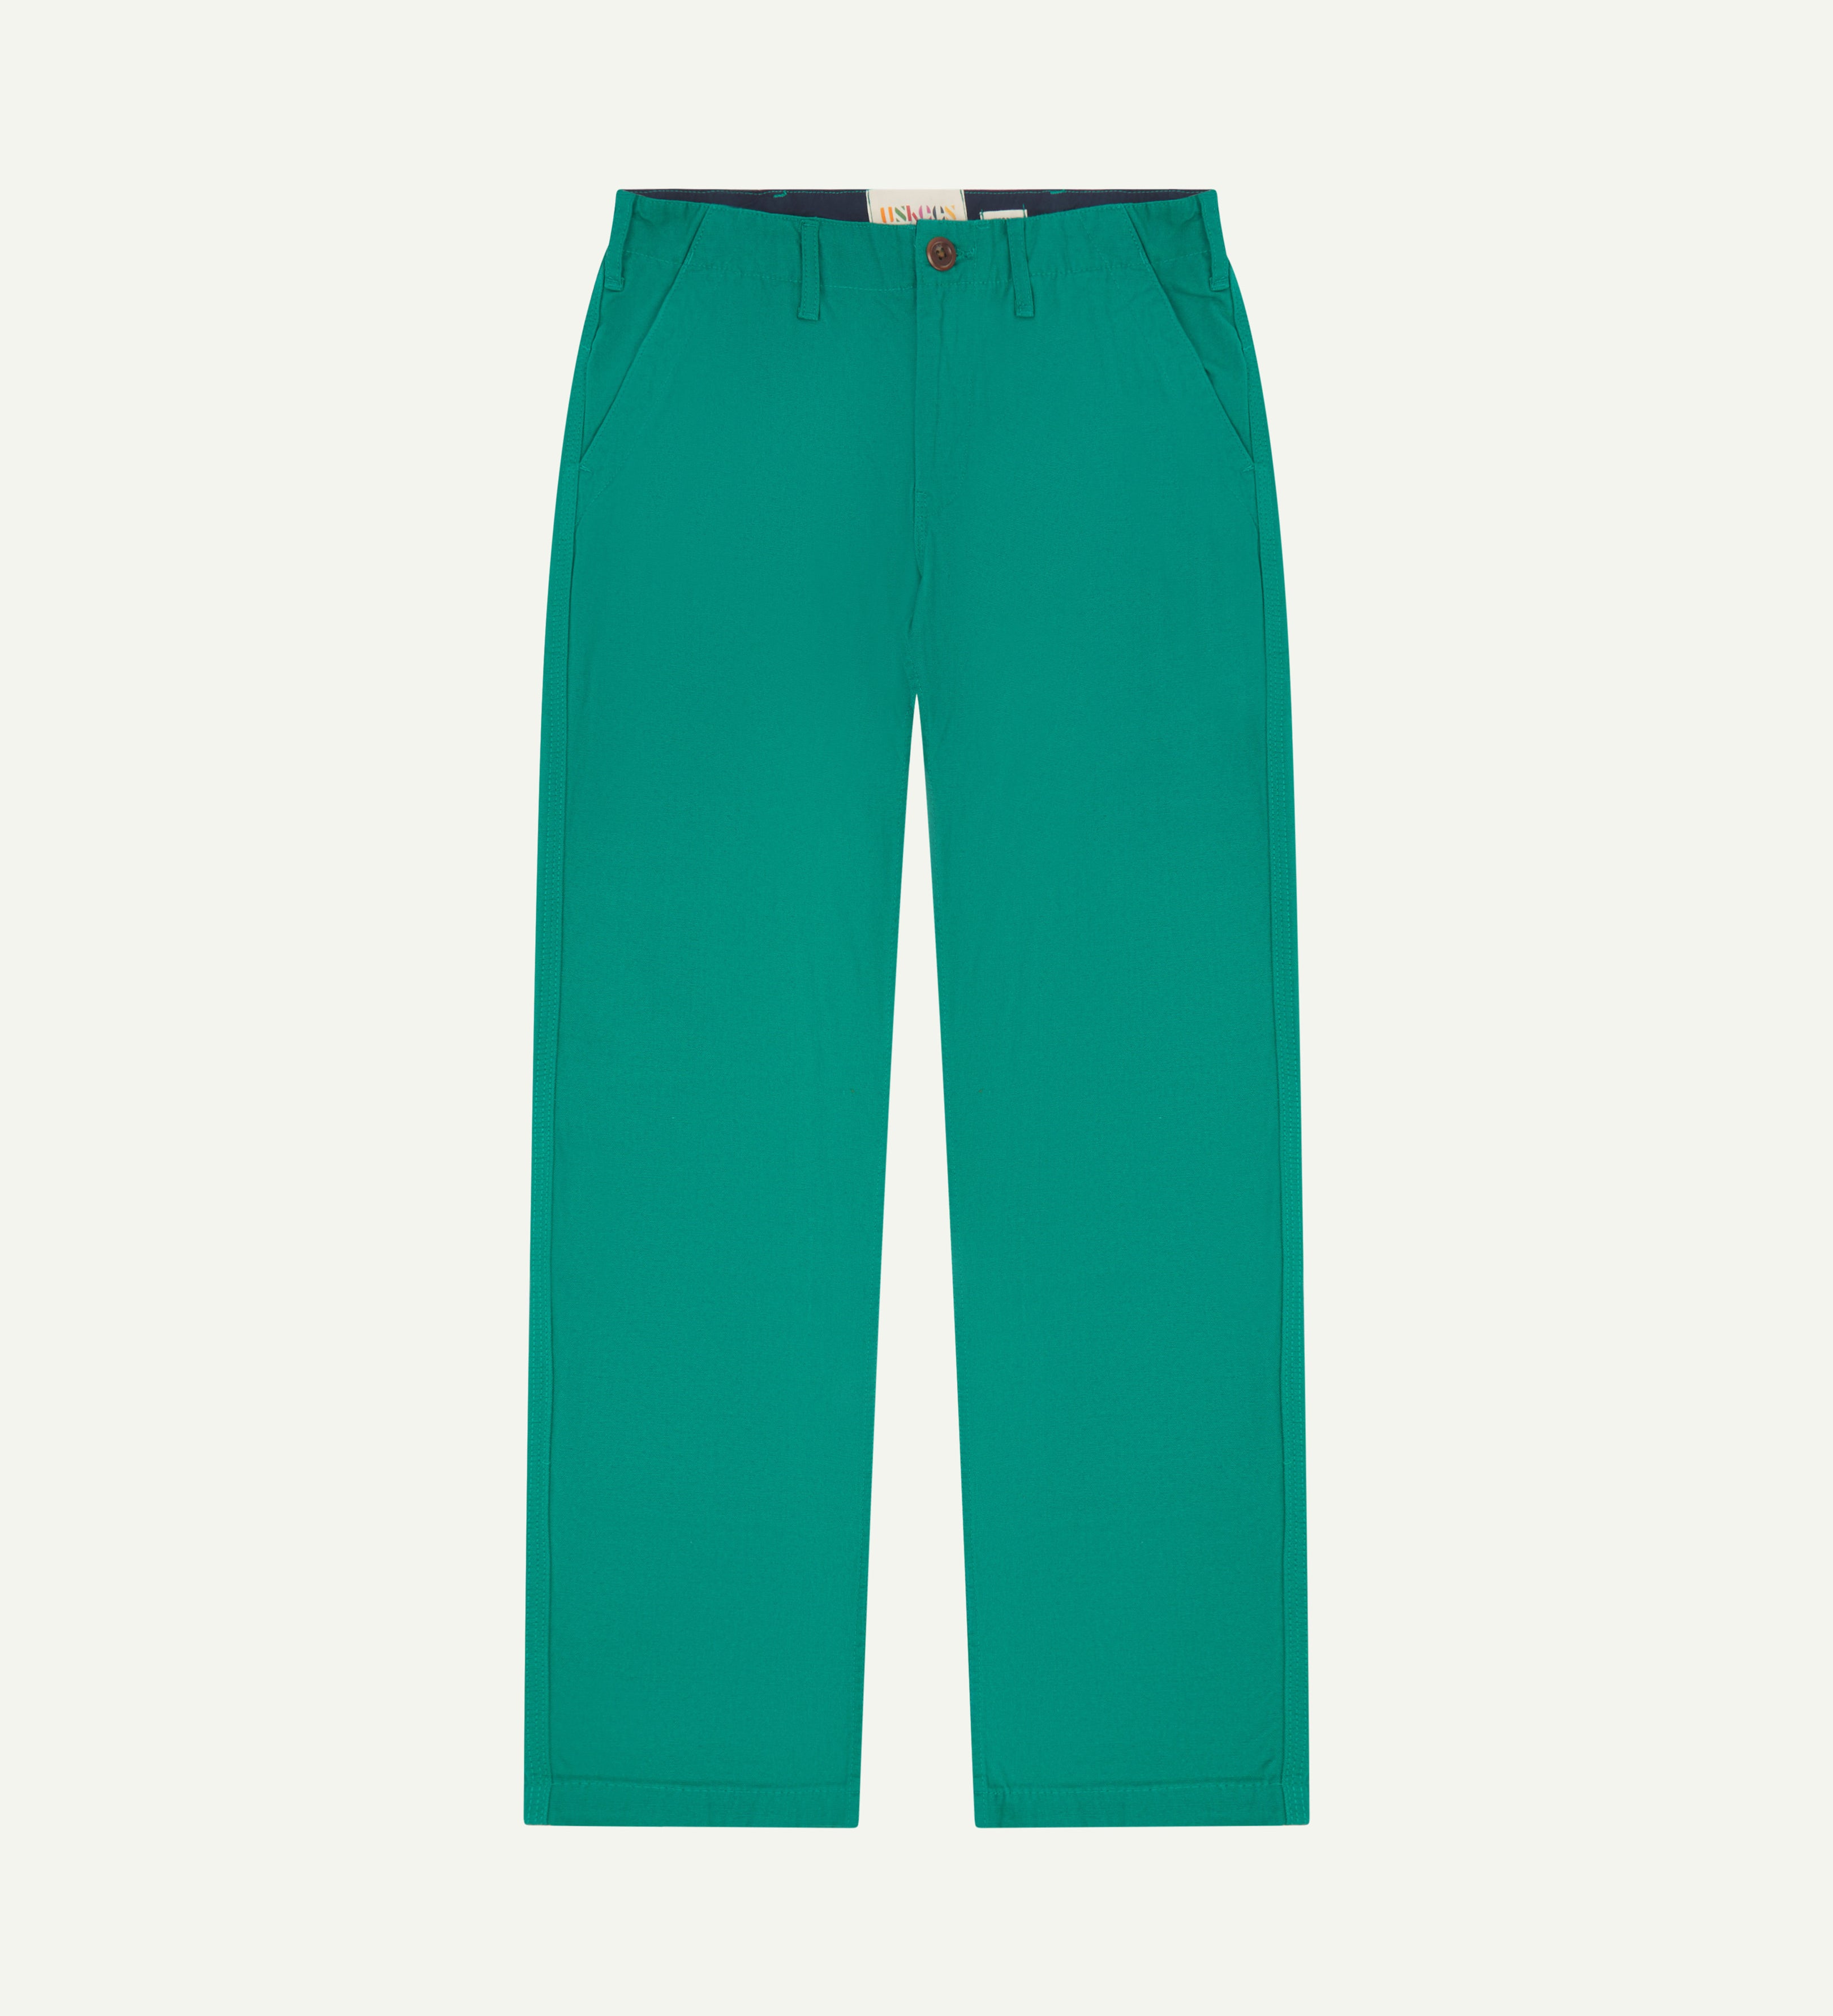 Flat view of #5005 Uskees men's organic cotton 'foam green' coloured trousers on white background.